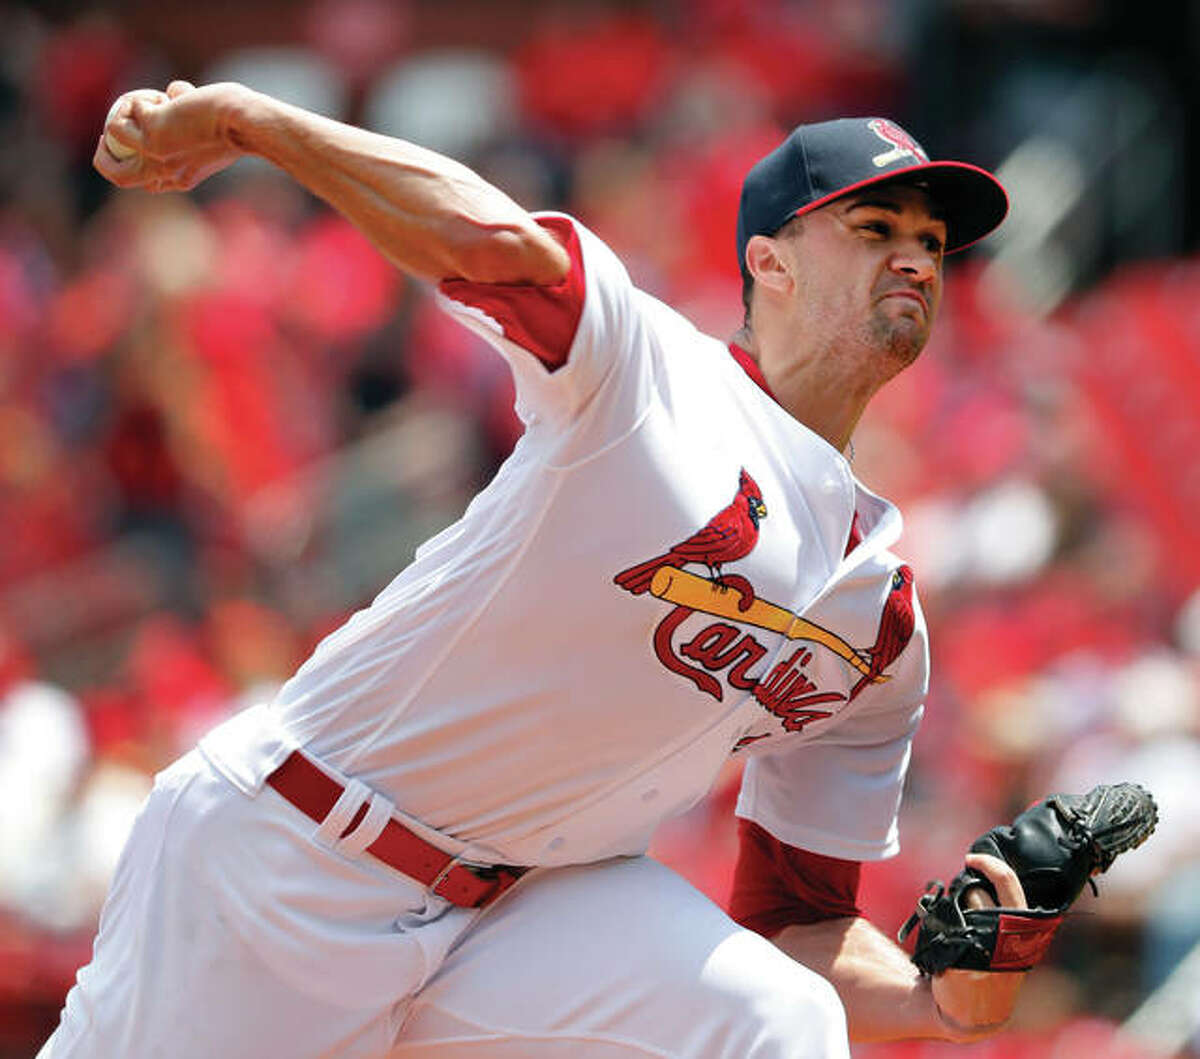 Cardinals starting pitcher Jack Flaherty throws during the first inning against the Philadelphia Phillies on Sunday at Busch Stadium. Flaherty struck out 13 in his first major-league win.